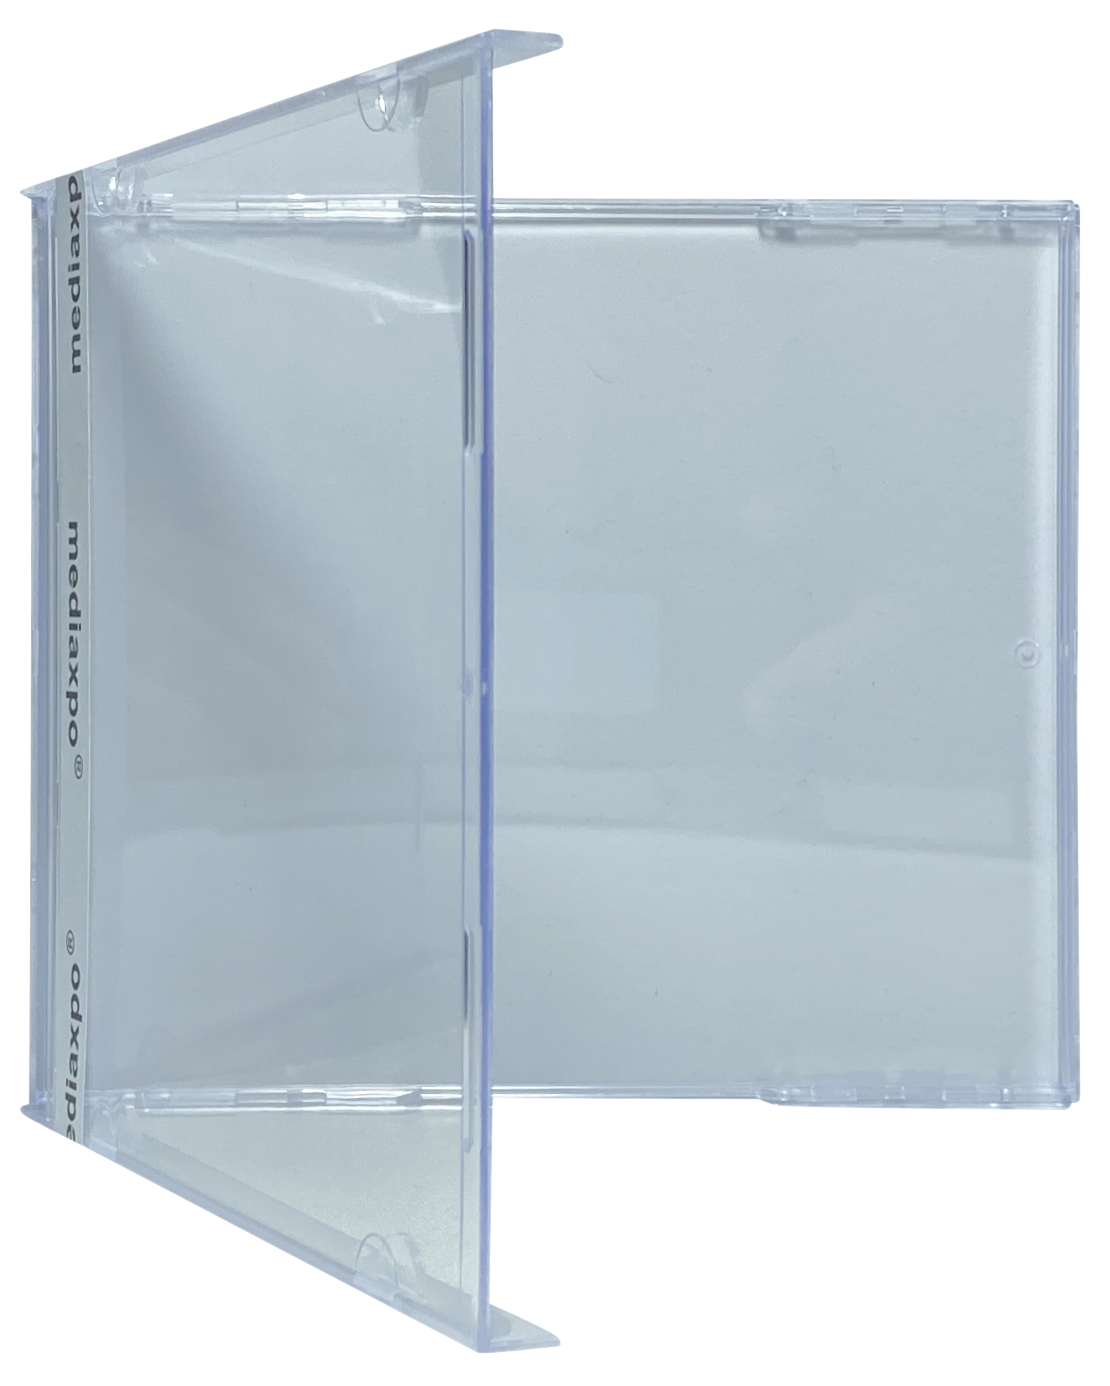 1200 STANDARD CD Jewel Case (Carton Only NO Trays)